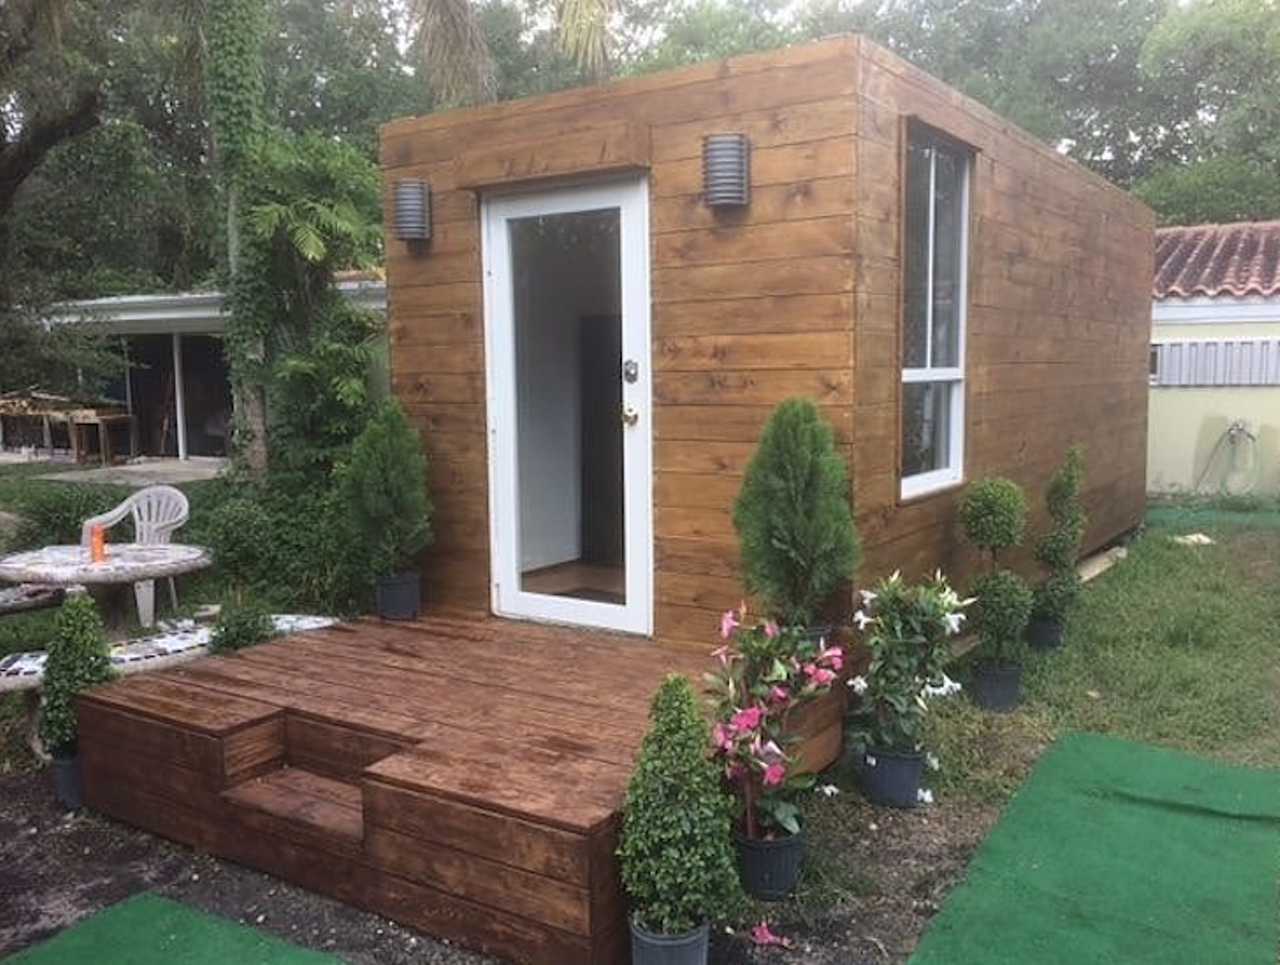 Portable Solid Home
Location: Miami
Price: $25,000 to $55,000
Size: 160 sq. ft.
This modern home located down in the 305 features an all-over wood frame that can withstand all conditions. Also, the windows and doors are hurricane proof. Constructors can make one just like this or with larger square footage.
